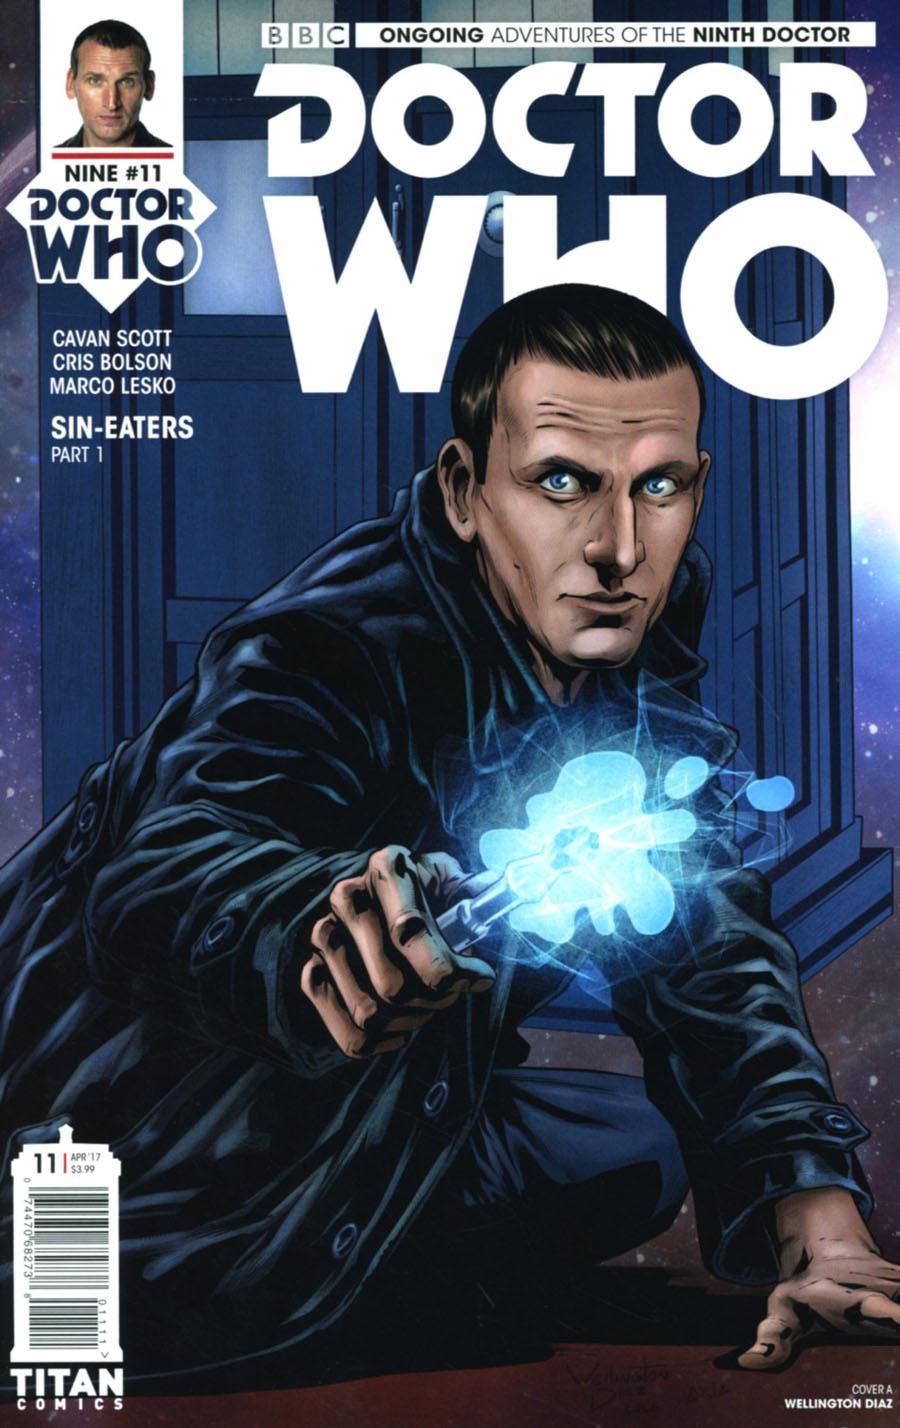 Doctor Who 9th Doctor Vol. 2 #11